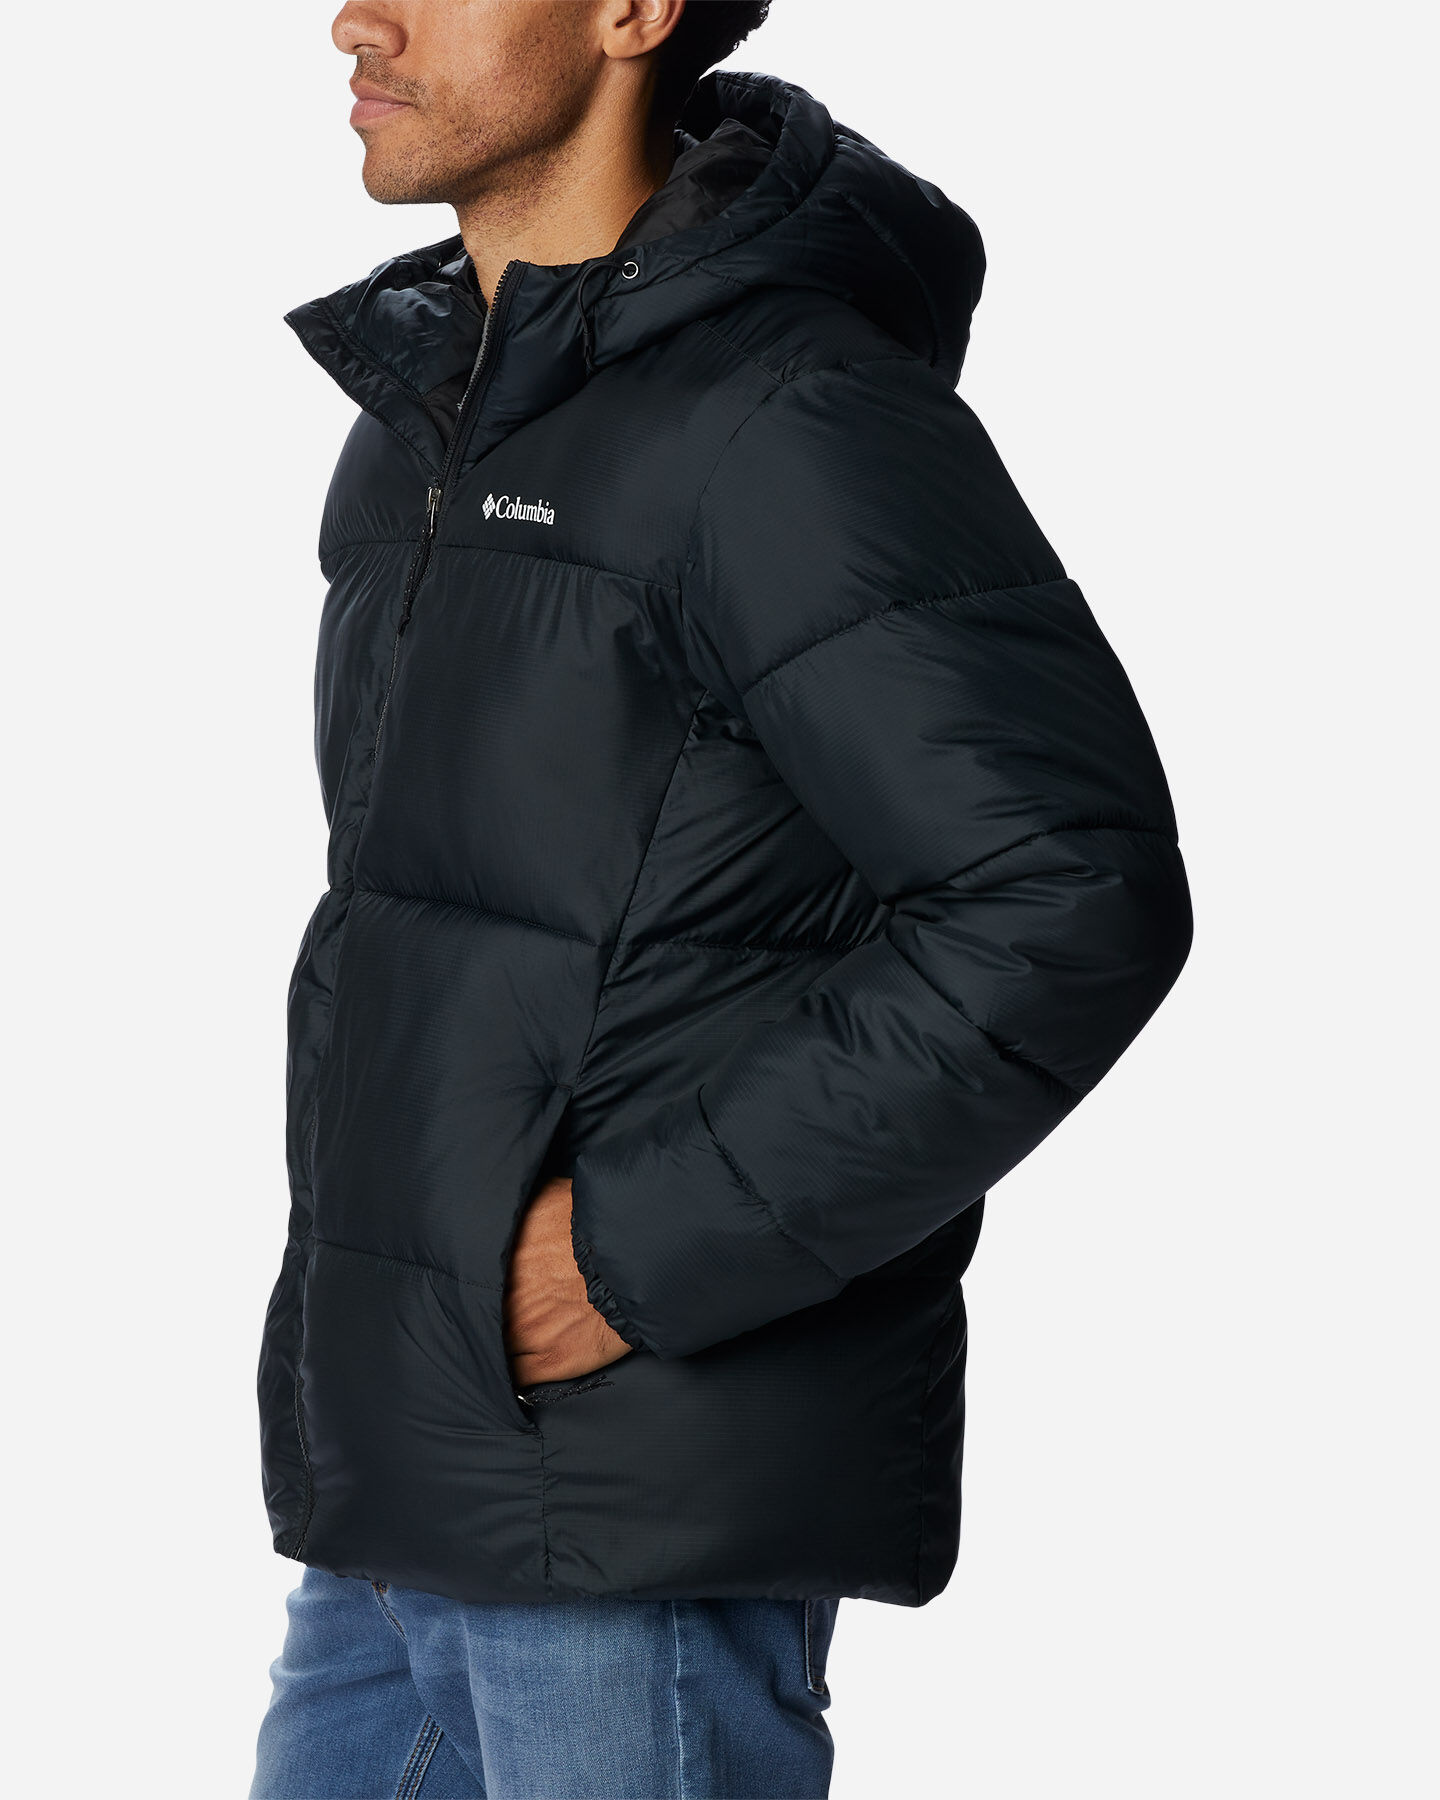  Giubbotto COLUMBIA PUFFED HOODED M S5483376 scatto 1